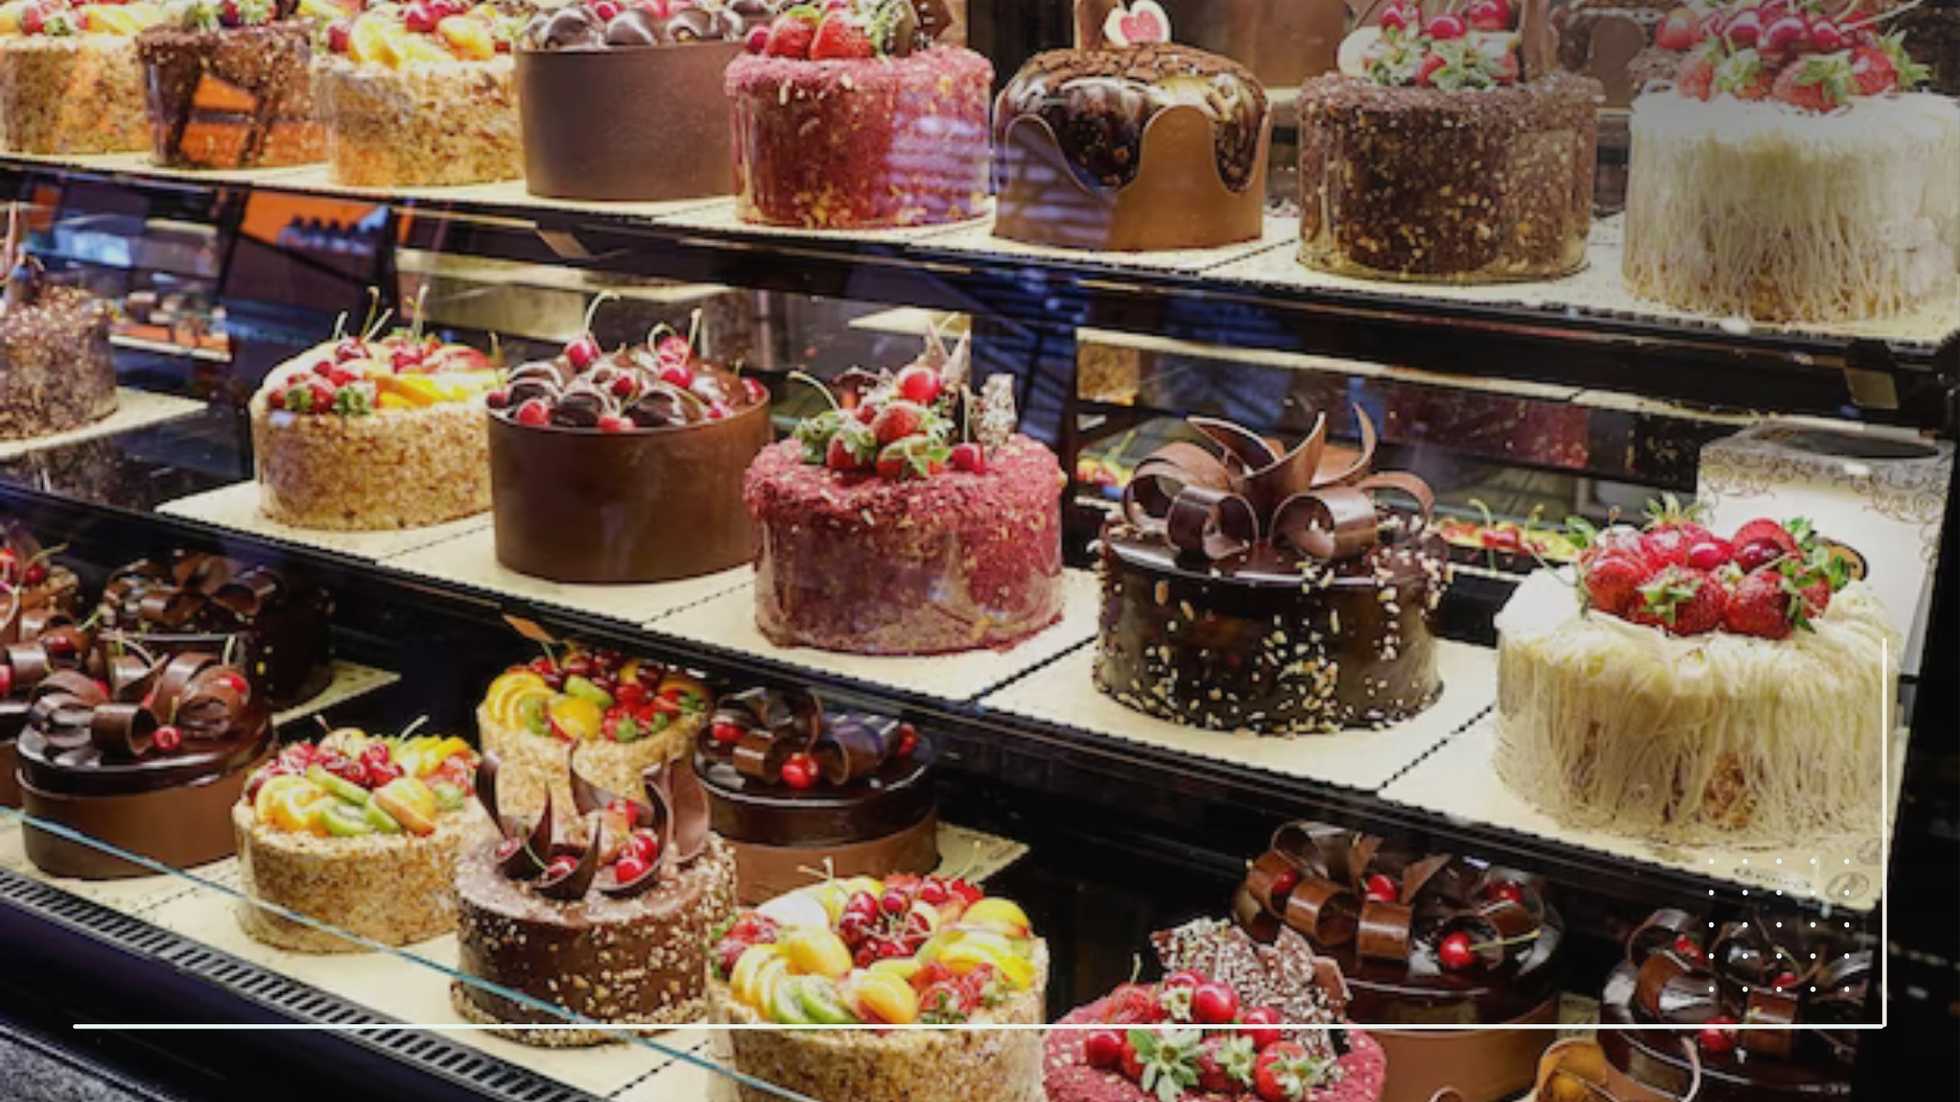 An image of a cake shop